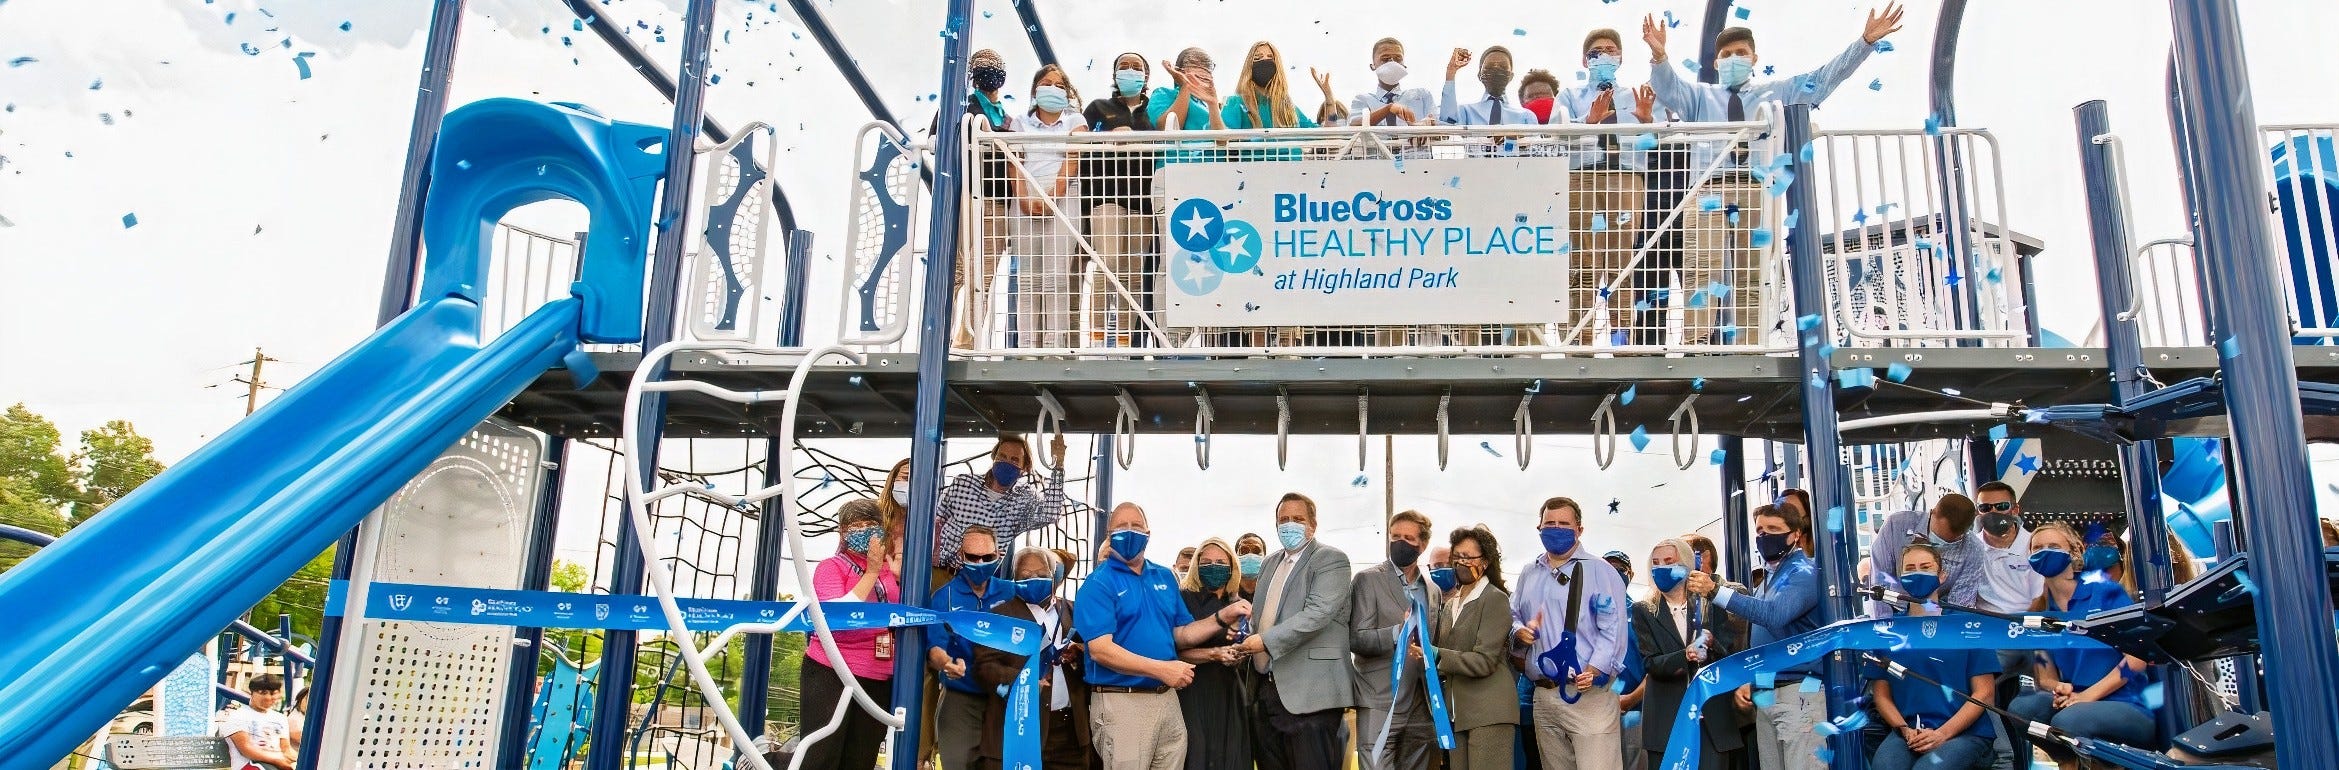 GameTime Celebrates the Newest BlueCross Healthy Place in Chattanooga, Tennessee